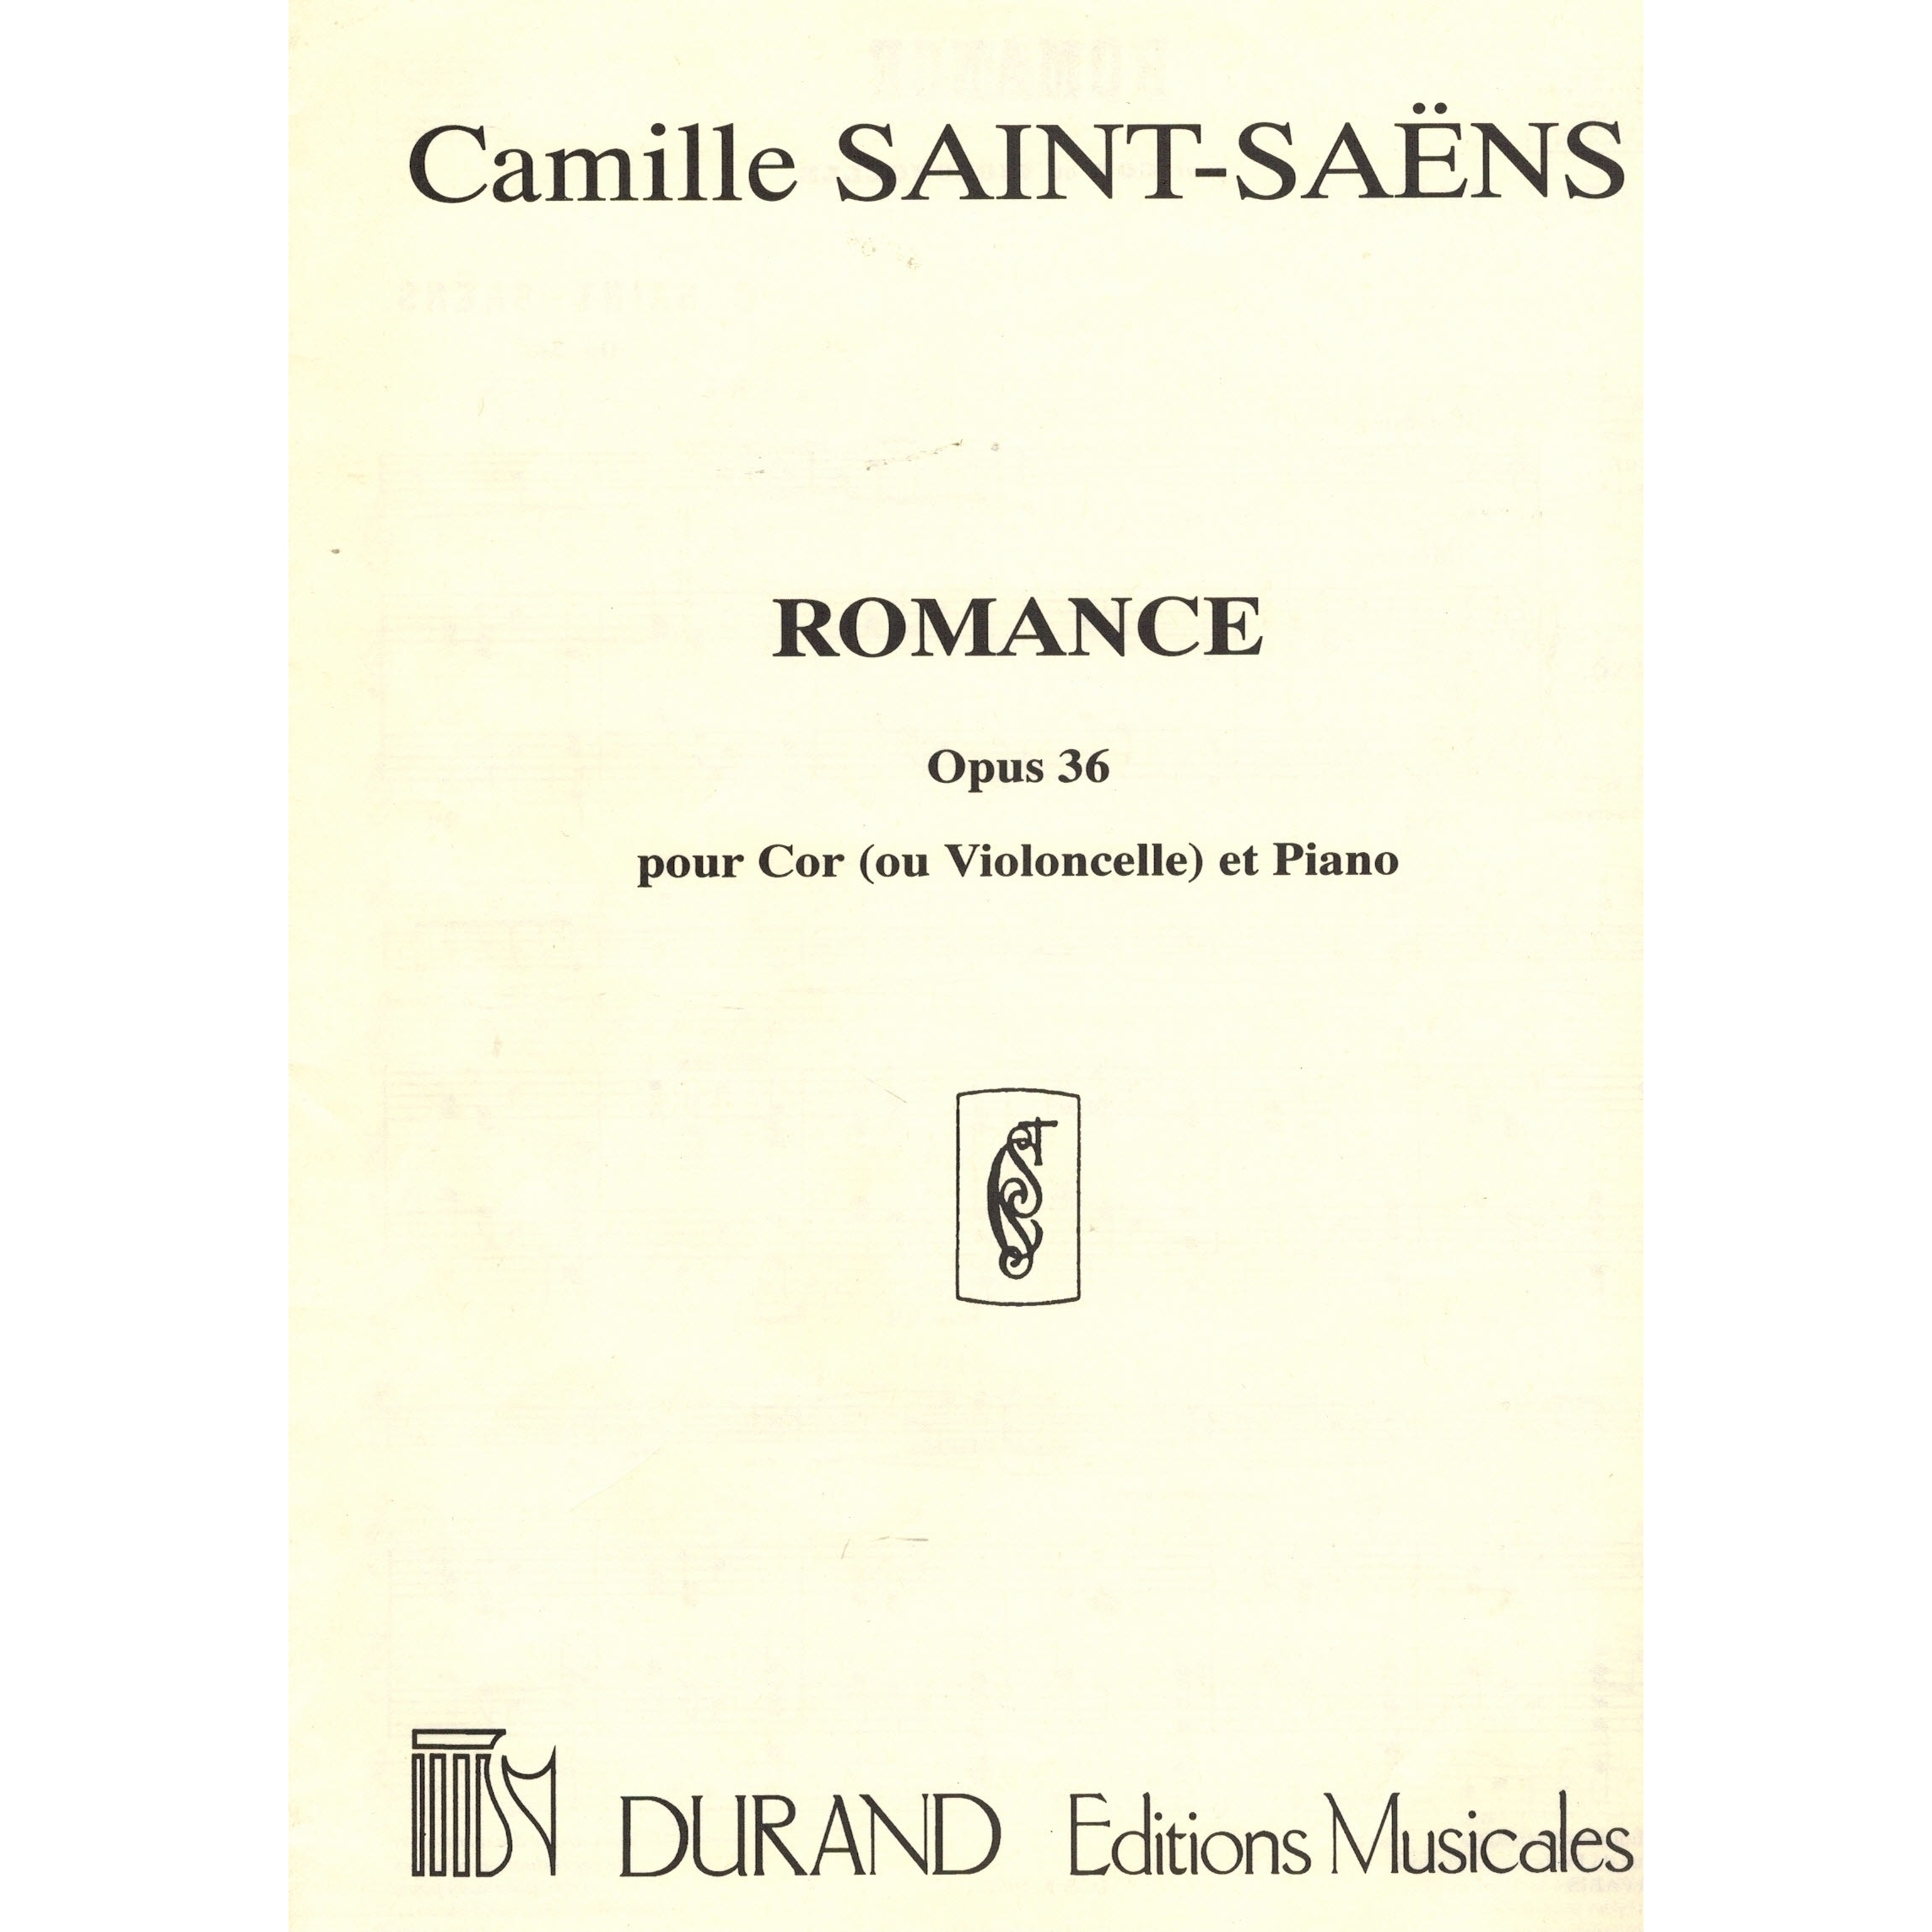 Romance for Horn (Cello) and Piano, Op36 - C. Saint-Saëns. Just Flutes